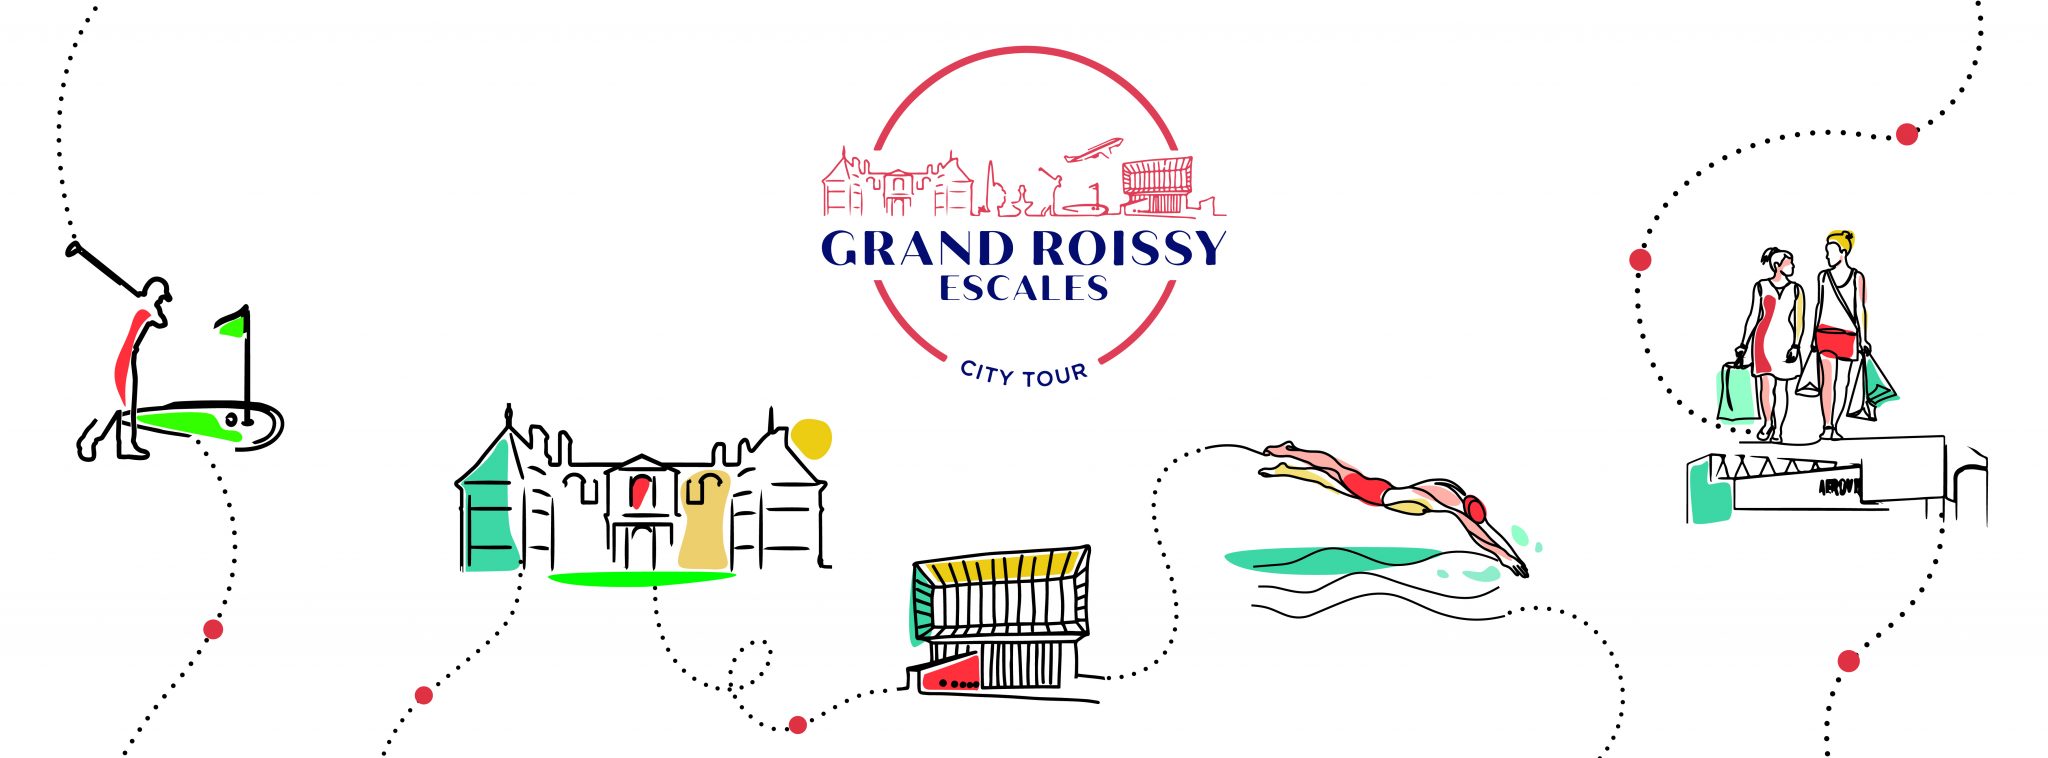 The Grand Roissy Tourist Office launches its City Tour